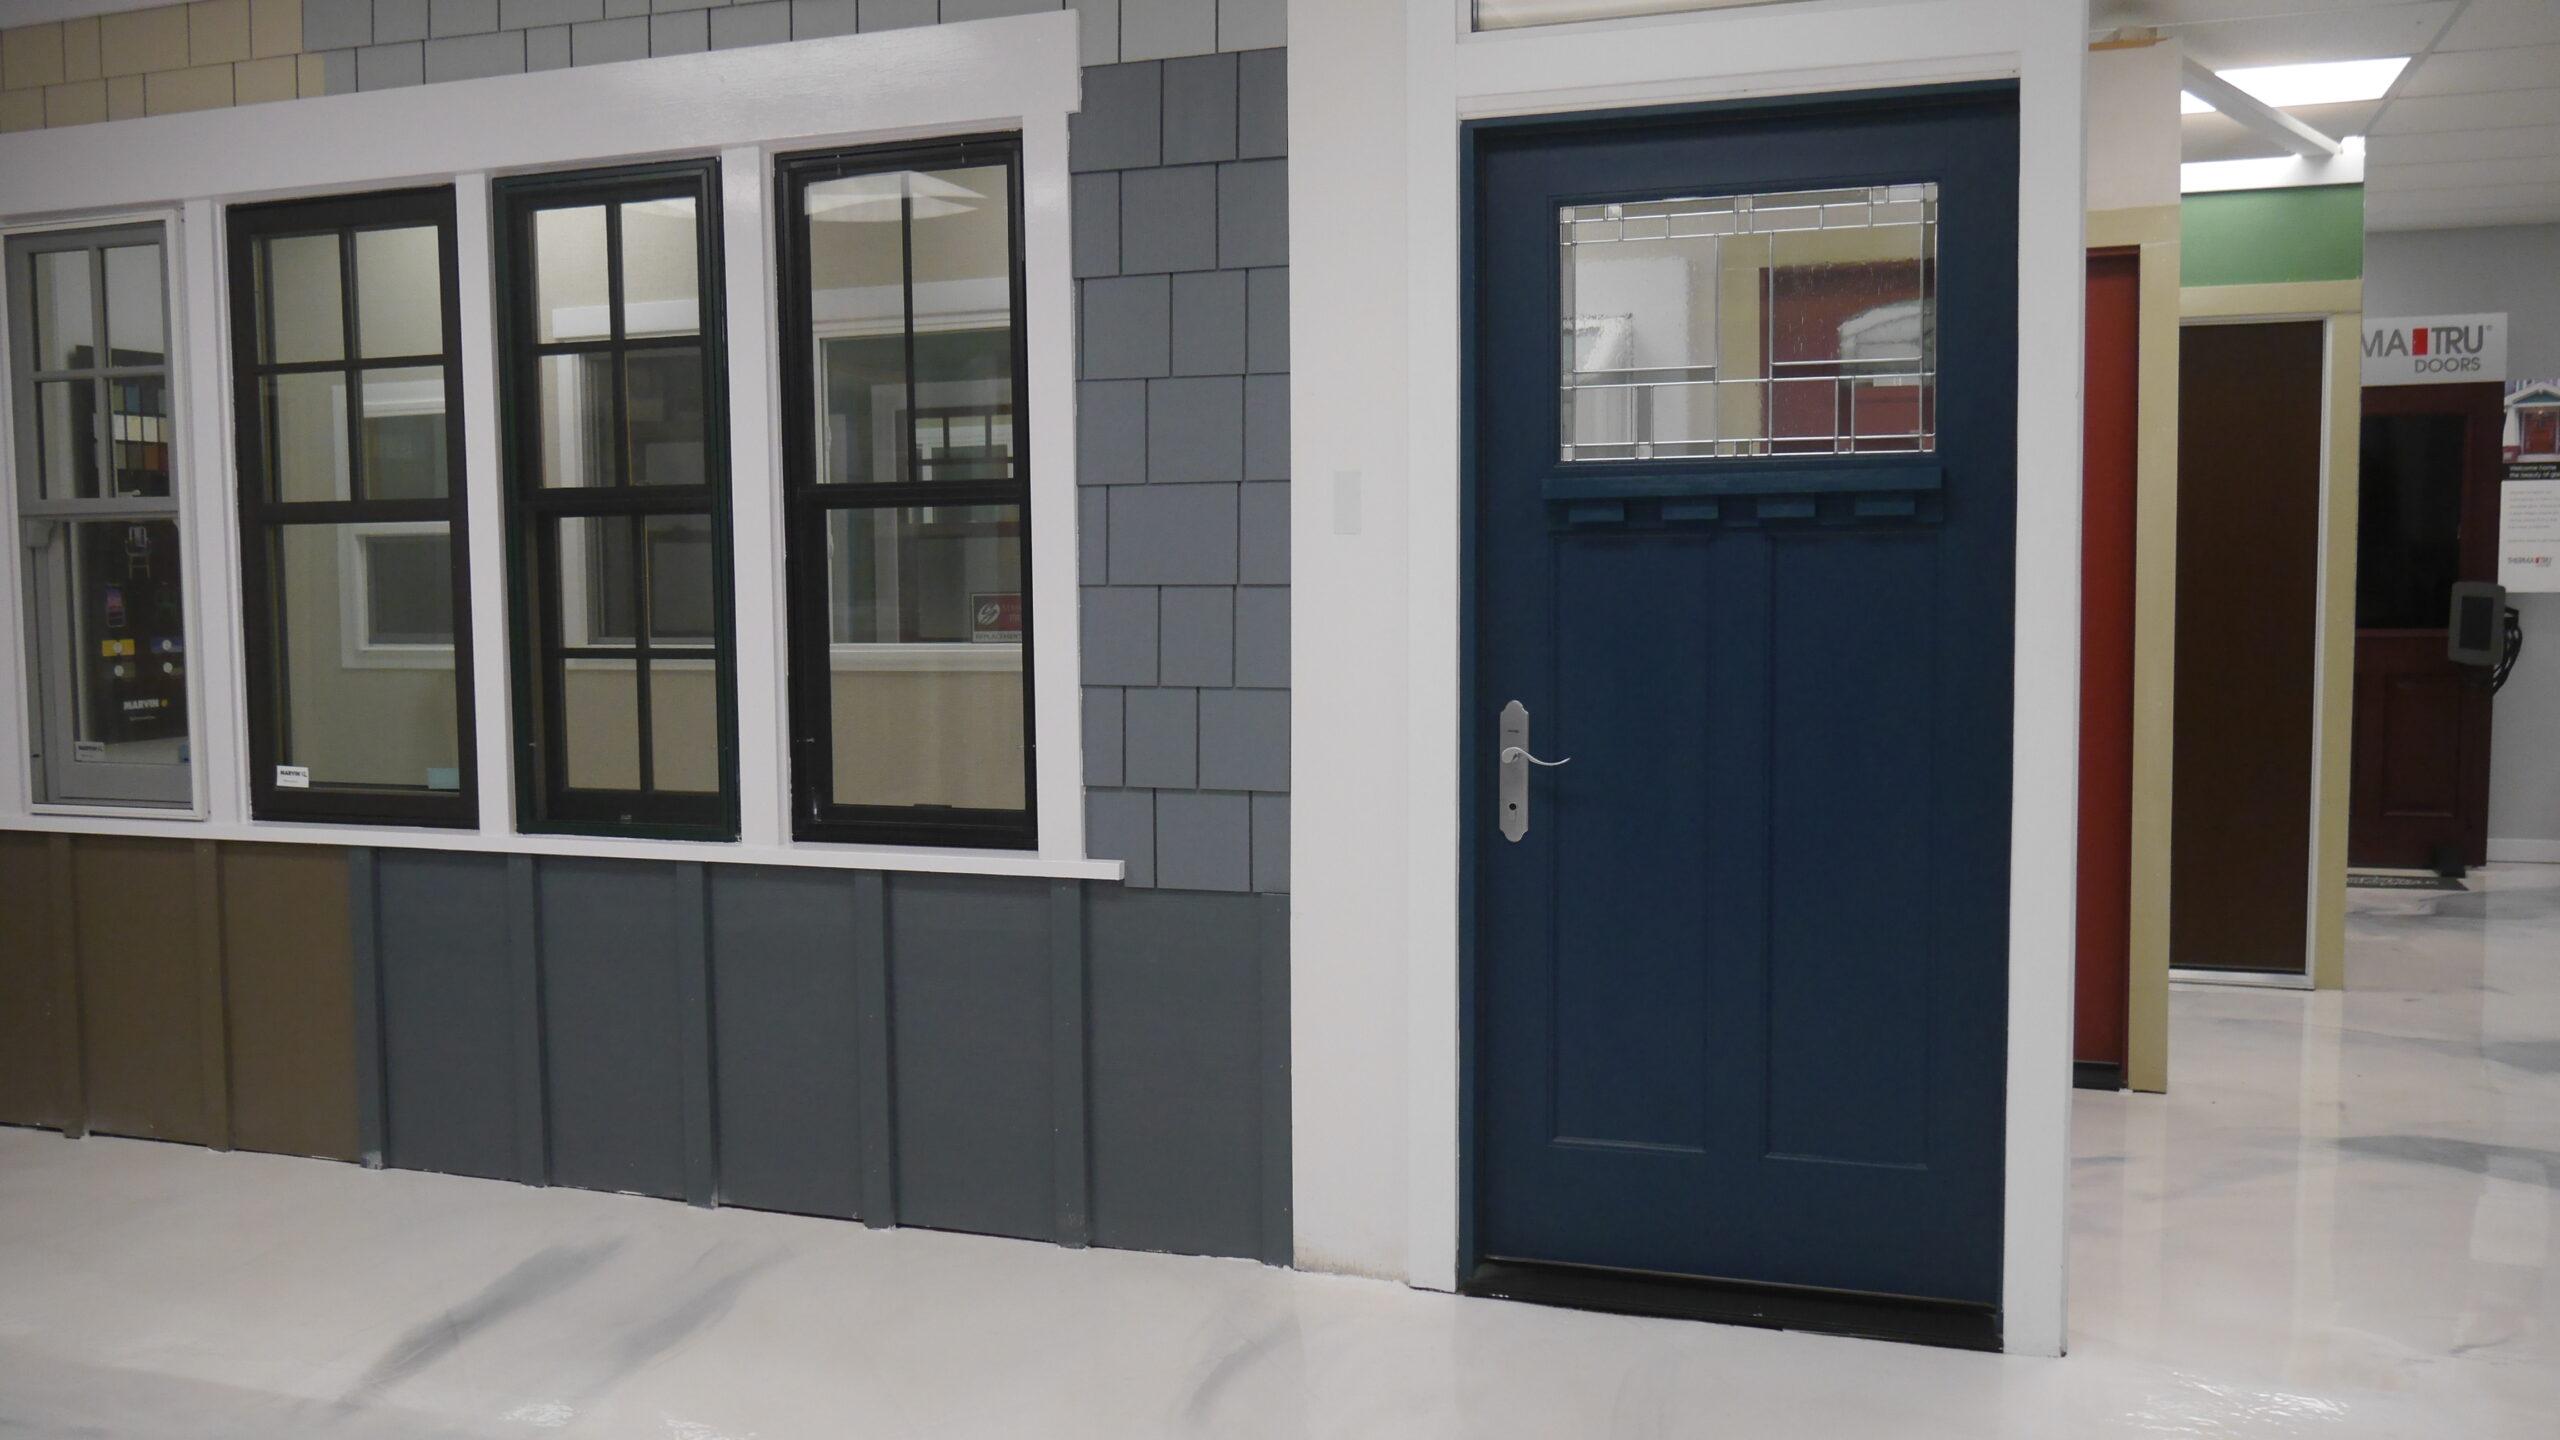 Picture of Save Energy Company's Petaluma showroom displays a wide range of window offerings from manufacturers like Simonton Milgard and Marvin along with entry doors from Therma-Tru. - Save Energy Company